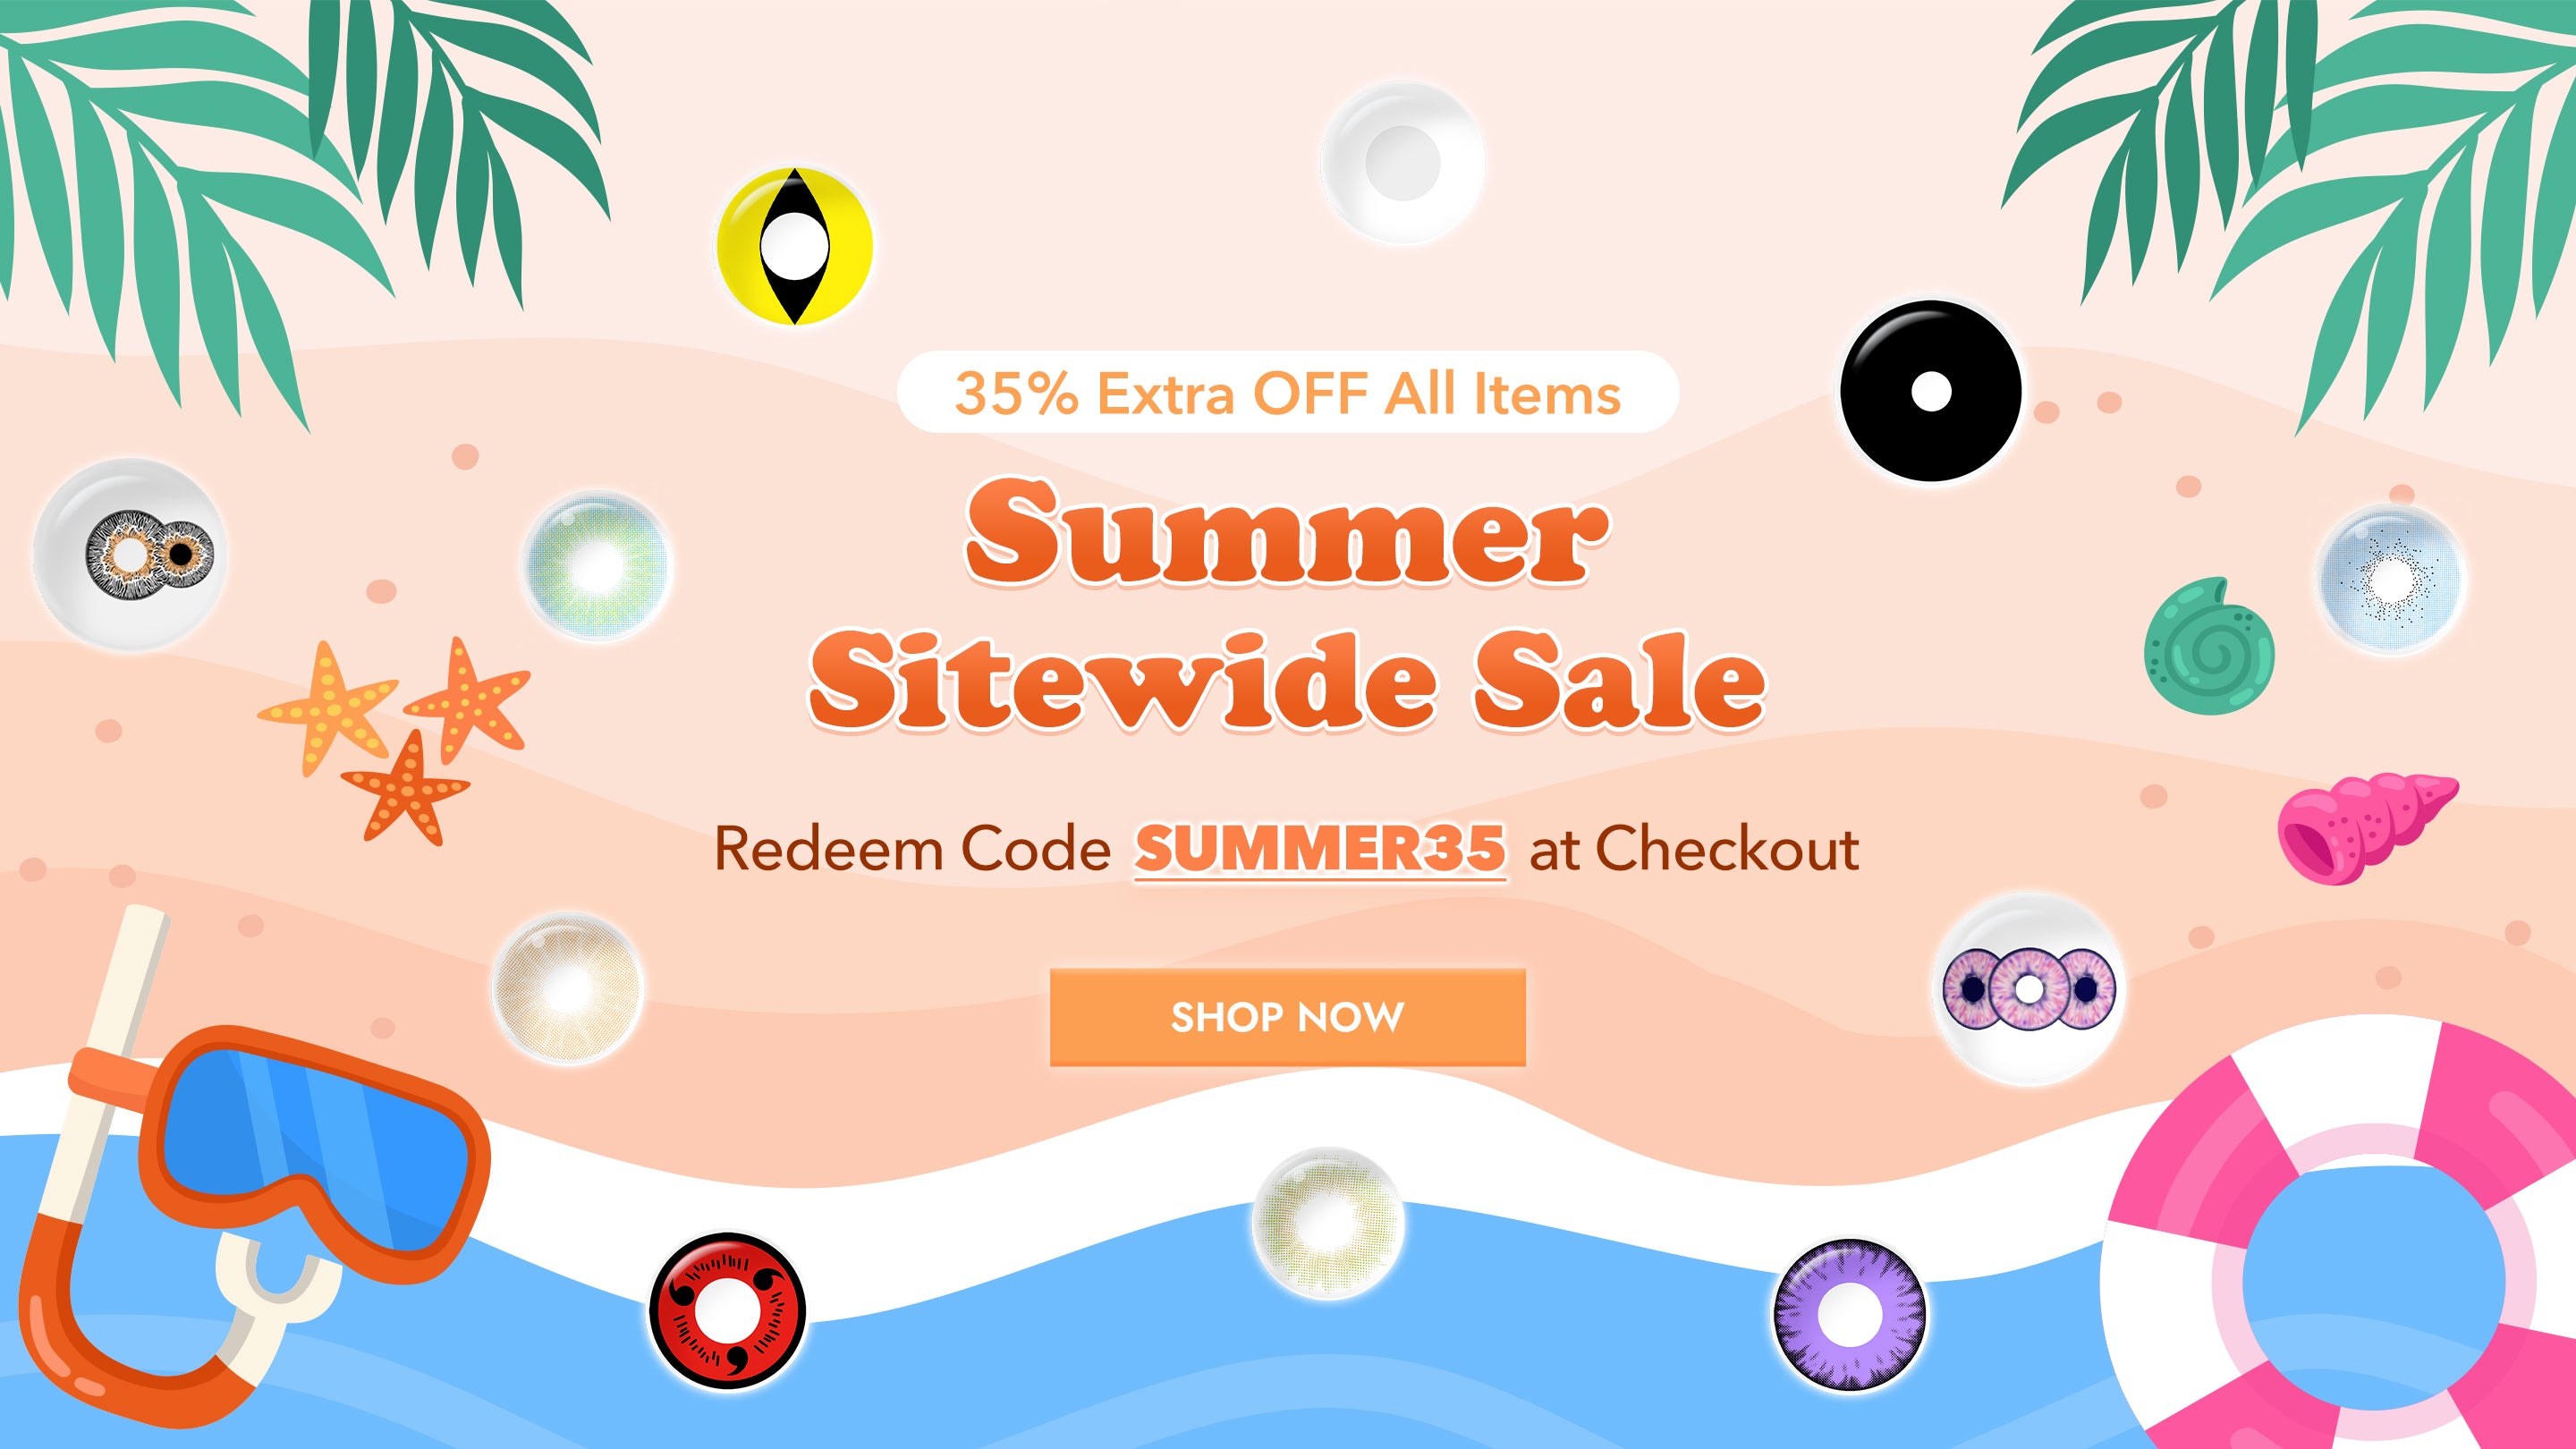 Dealmoon Exclusive: NEIWAI Sitewide Sale Up to 25% Off